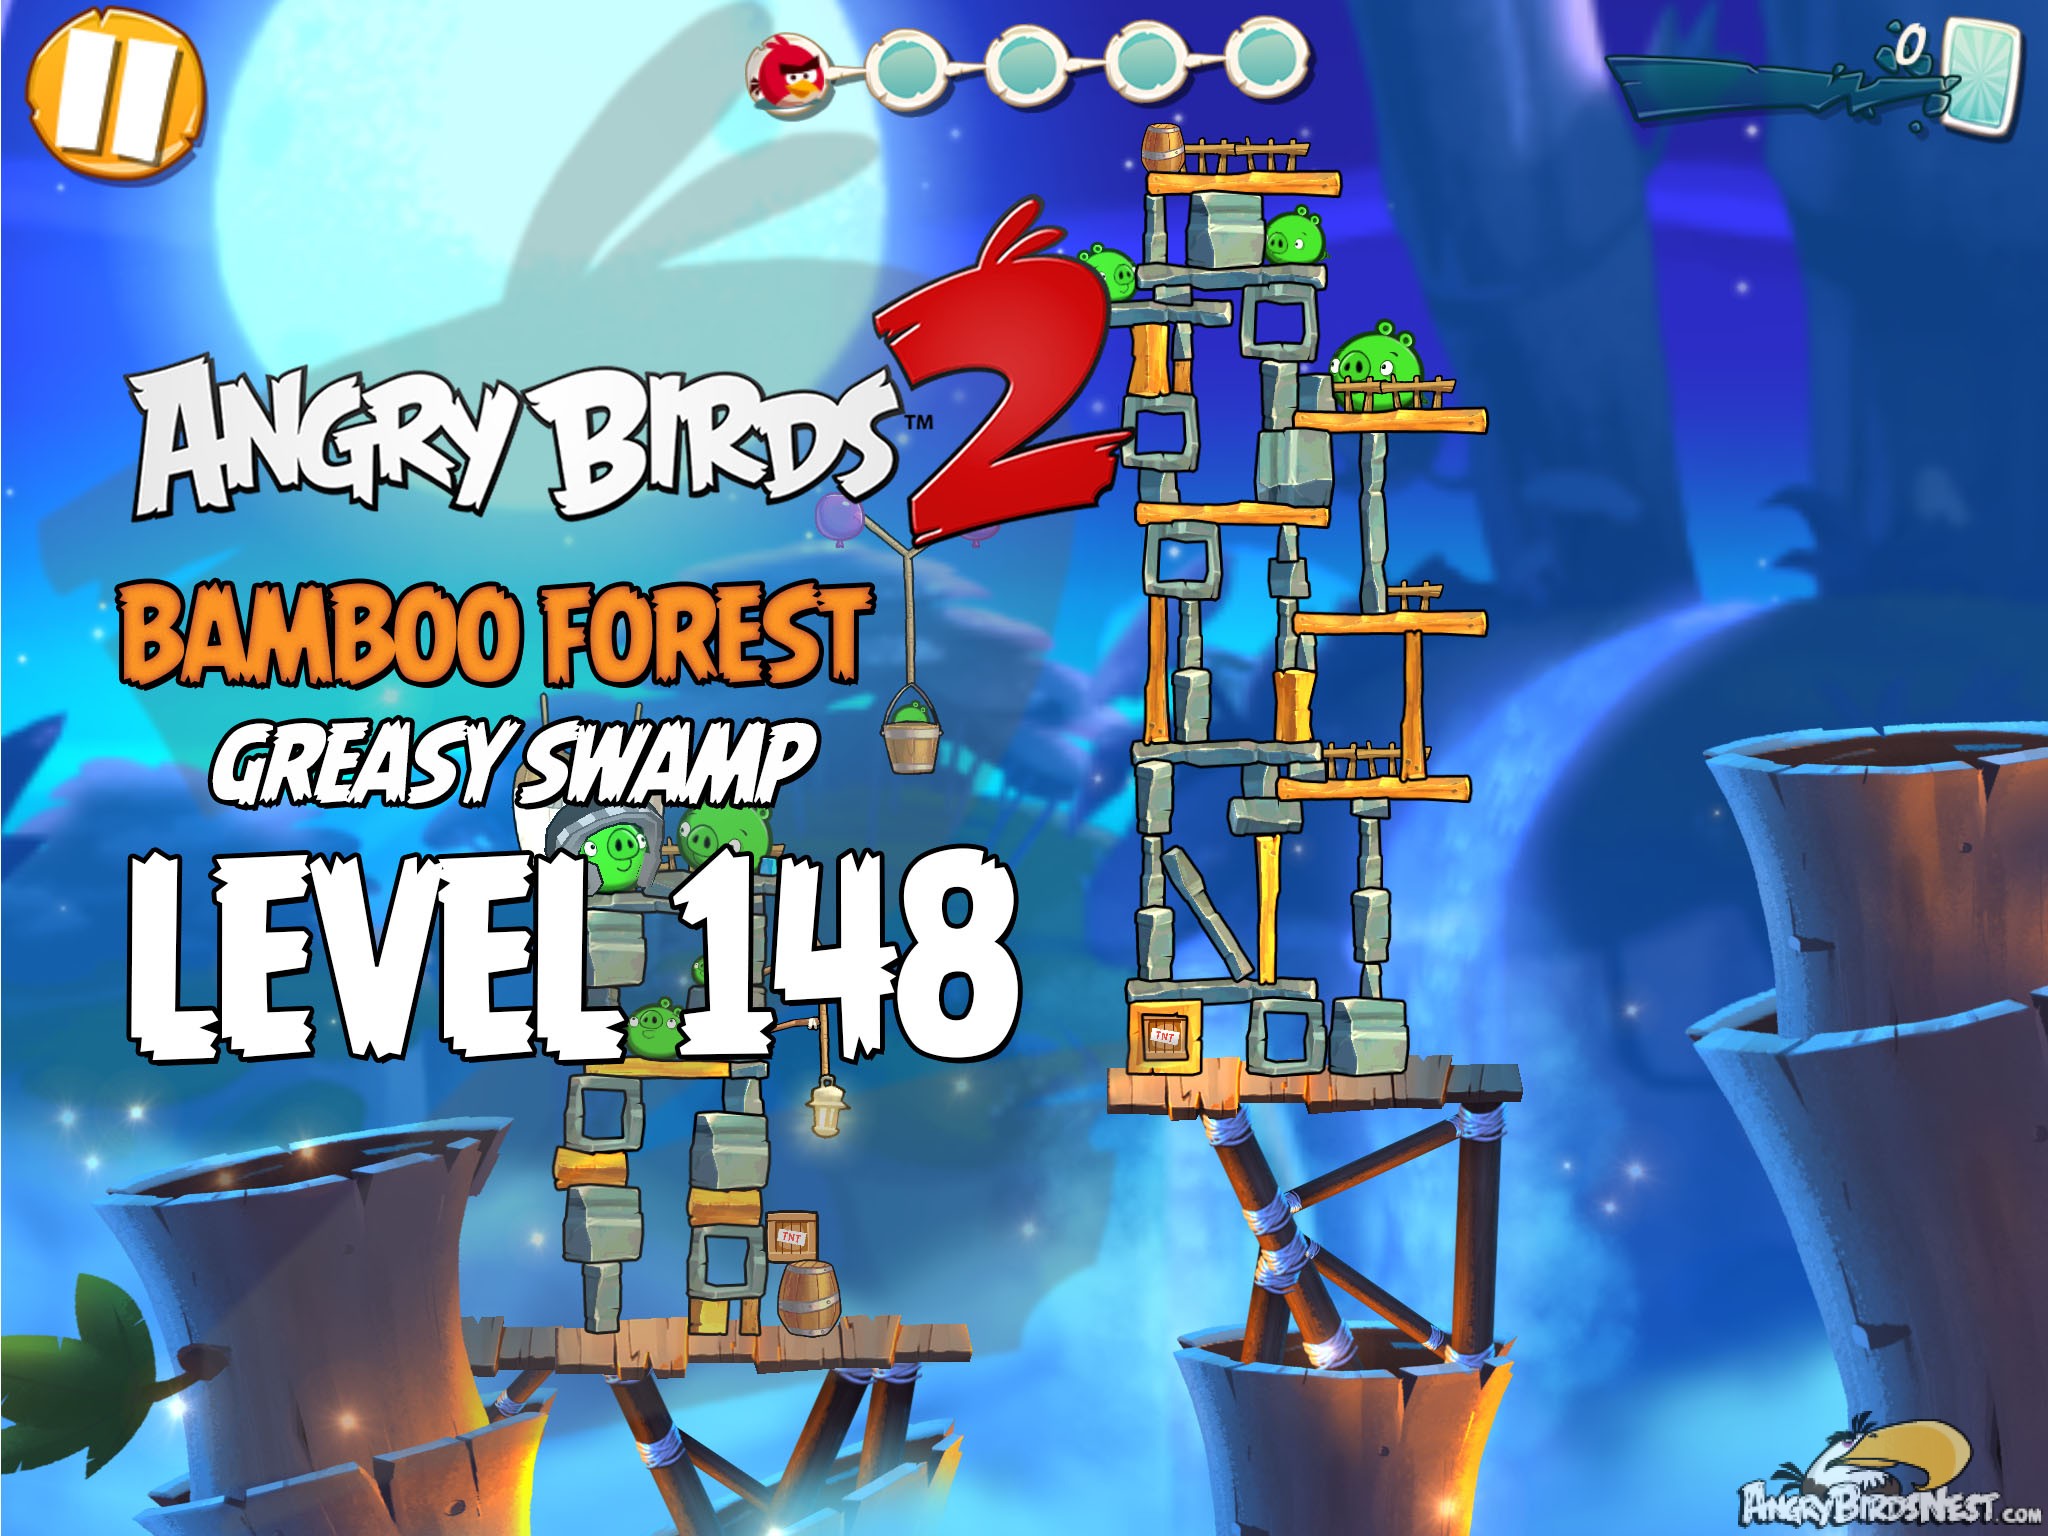 Angry Birds 2 Bamboo Forest Greasy Swamp Level 148